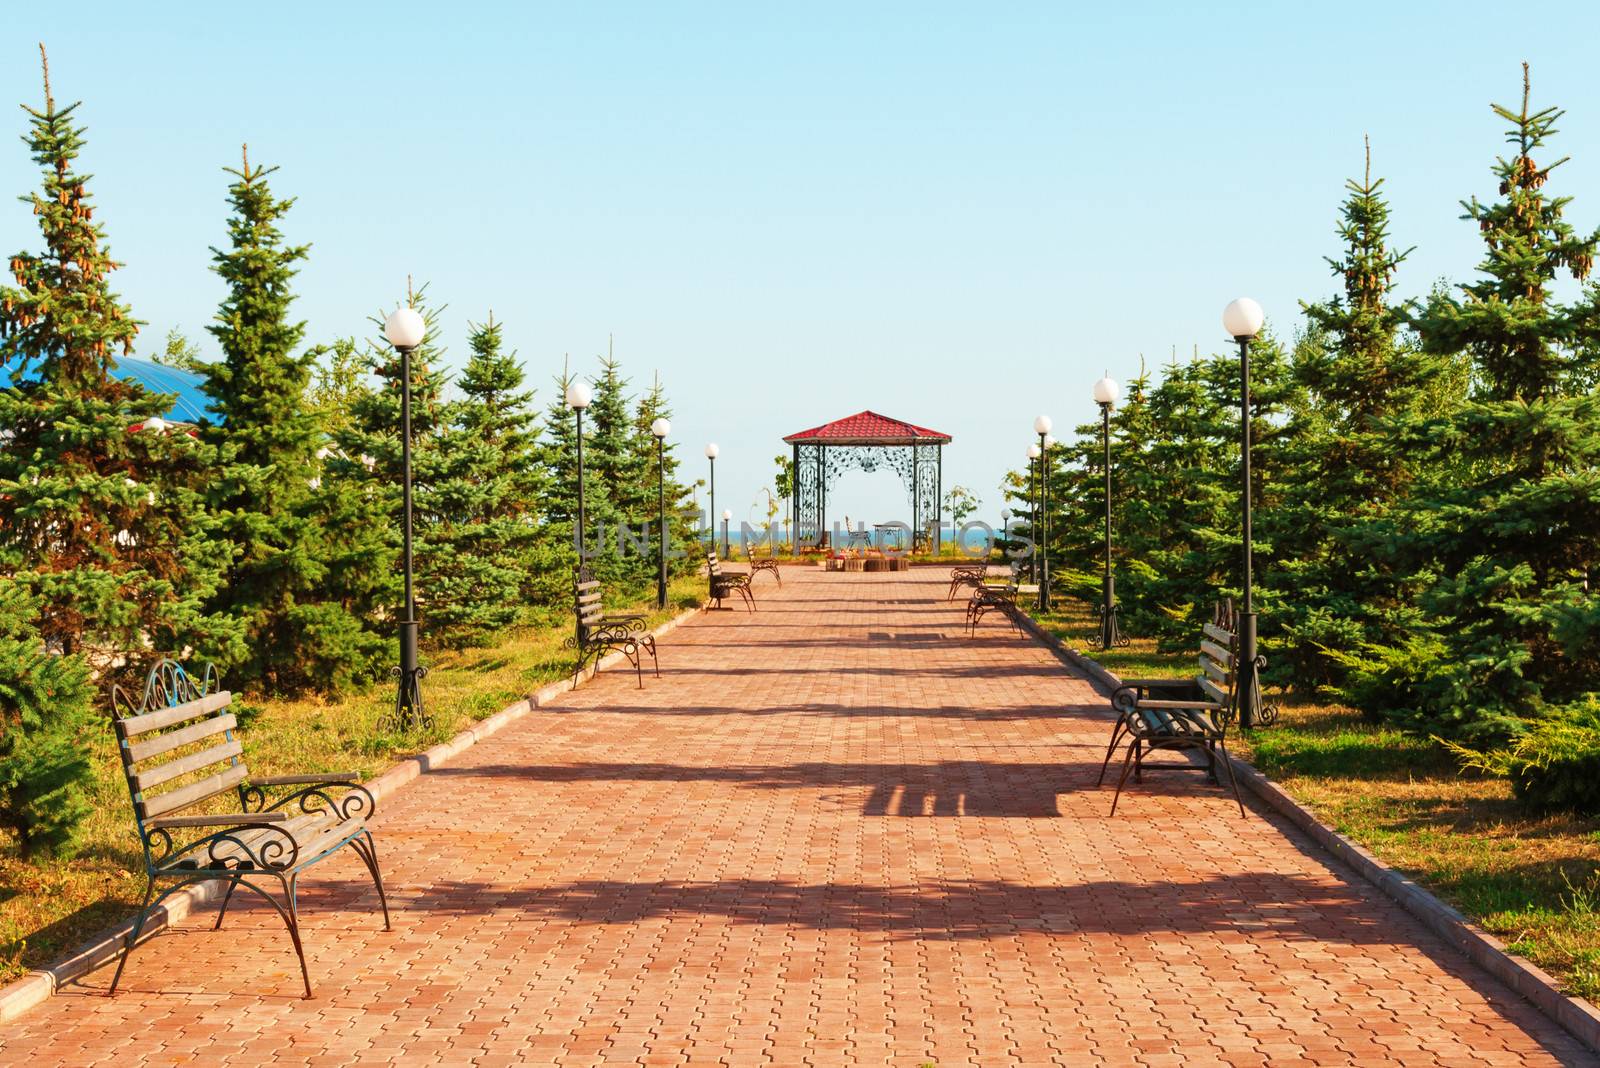 Wide path in nice light  park with benches and summerhouse under clean blue sky